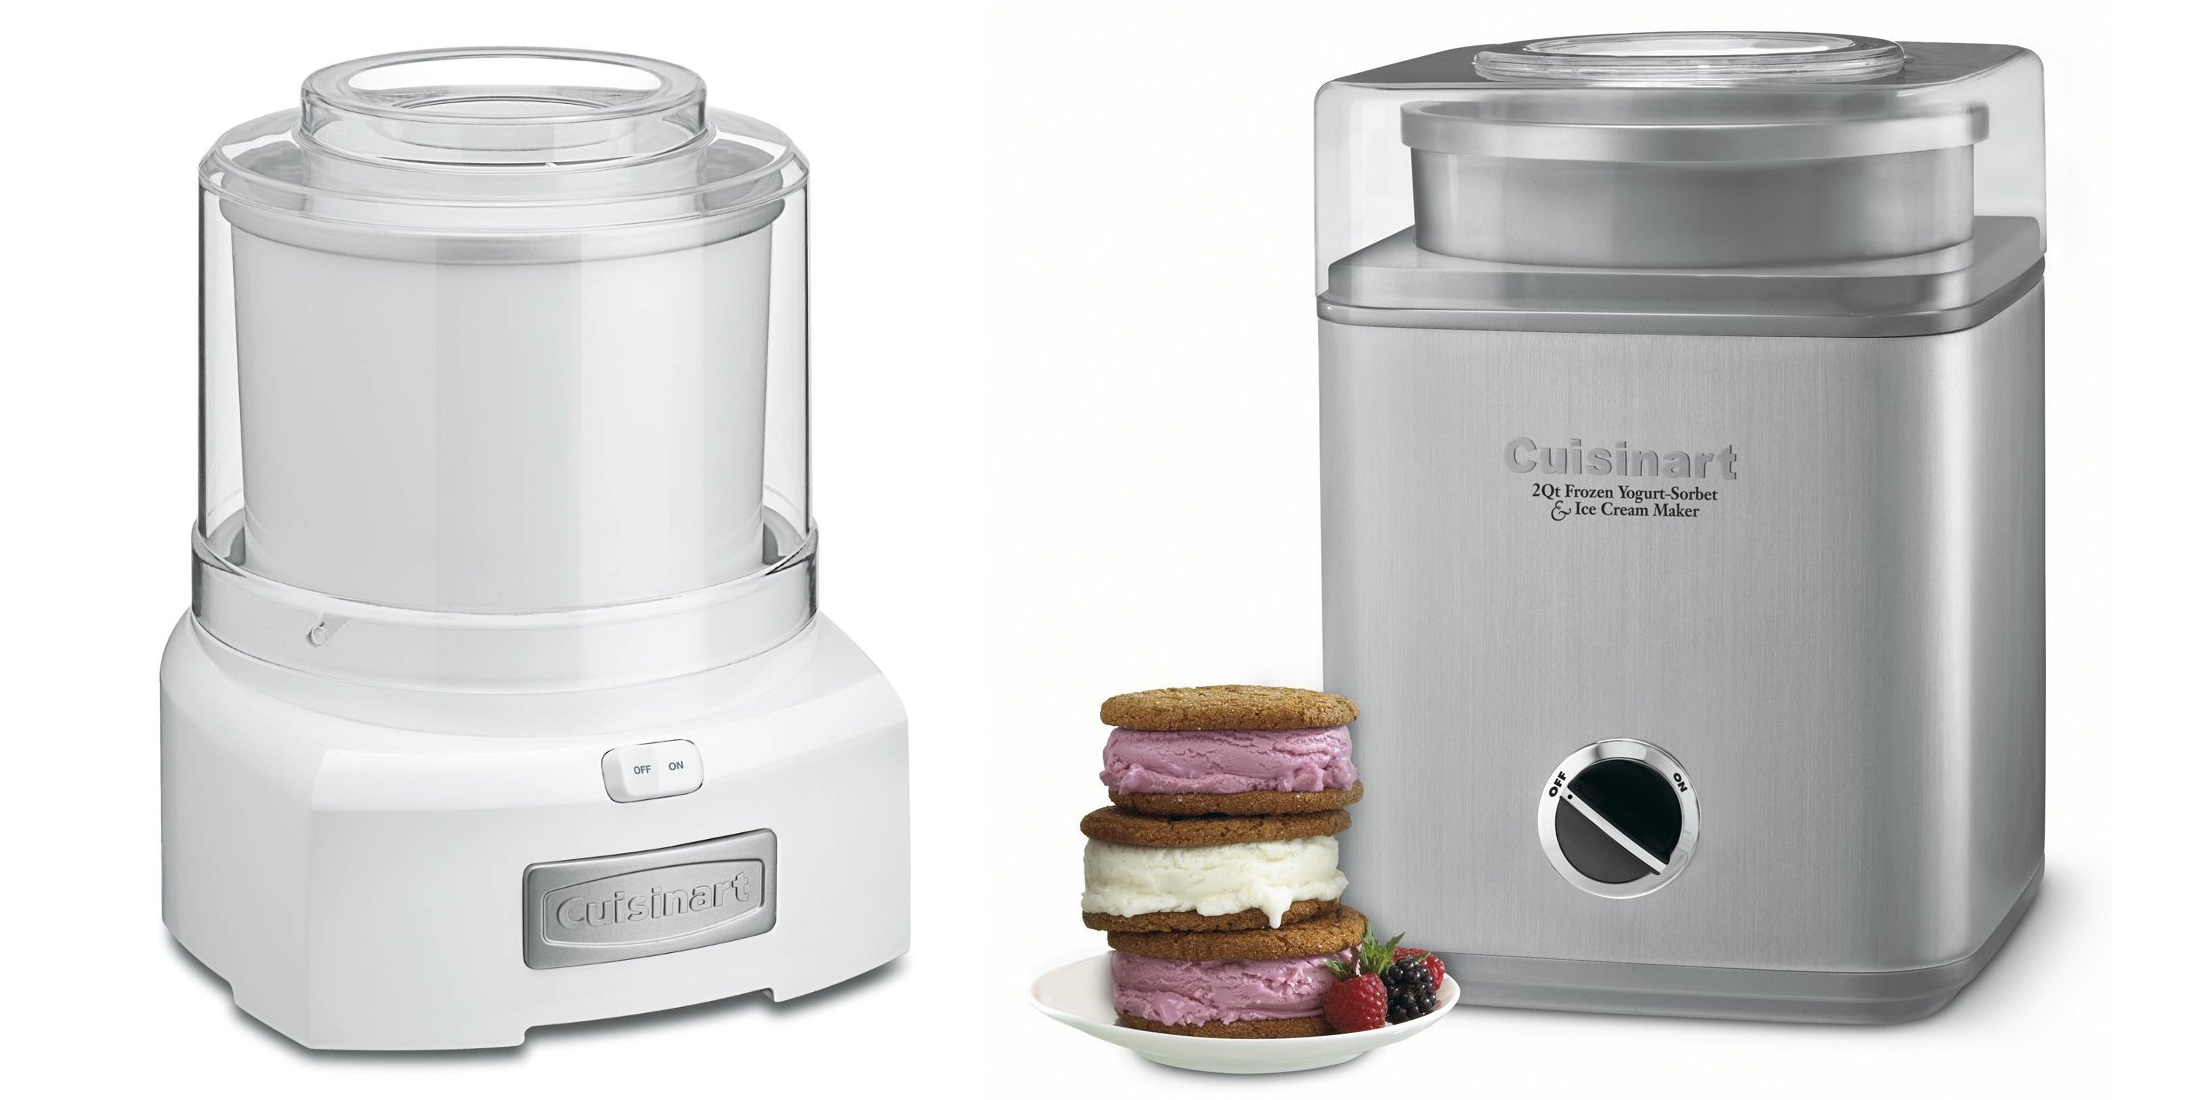 Home: Cuisinart ice cream makers (refurb) from $30 (Orig. $50+), Eddie Cuisinart Ice Cream Maker Won't Freeze